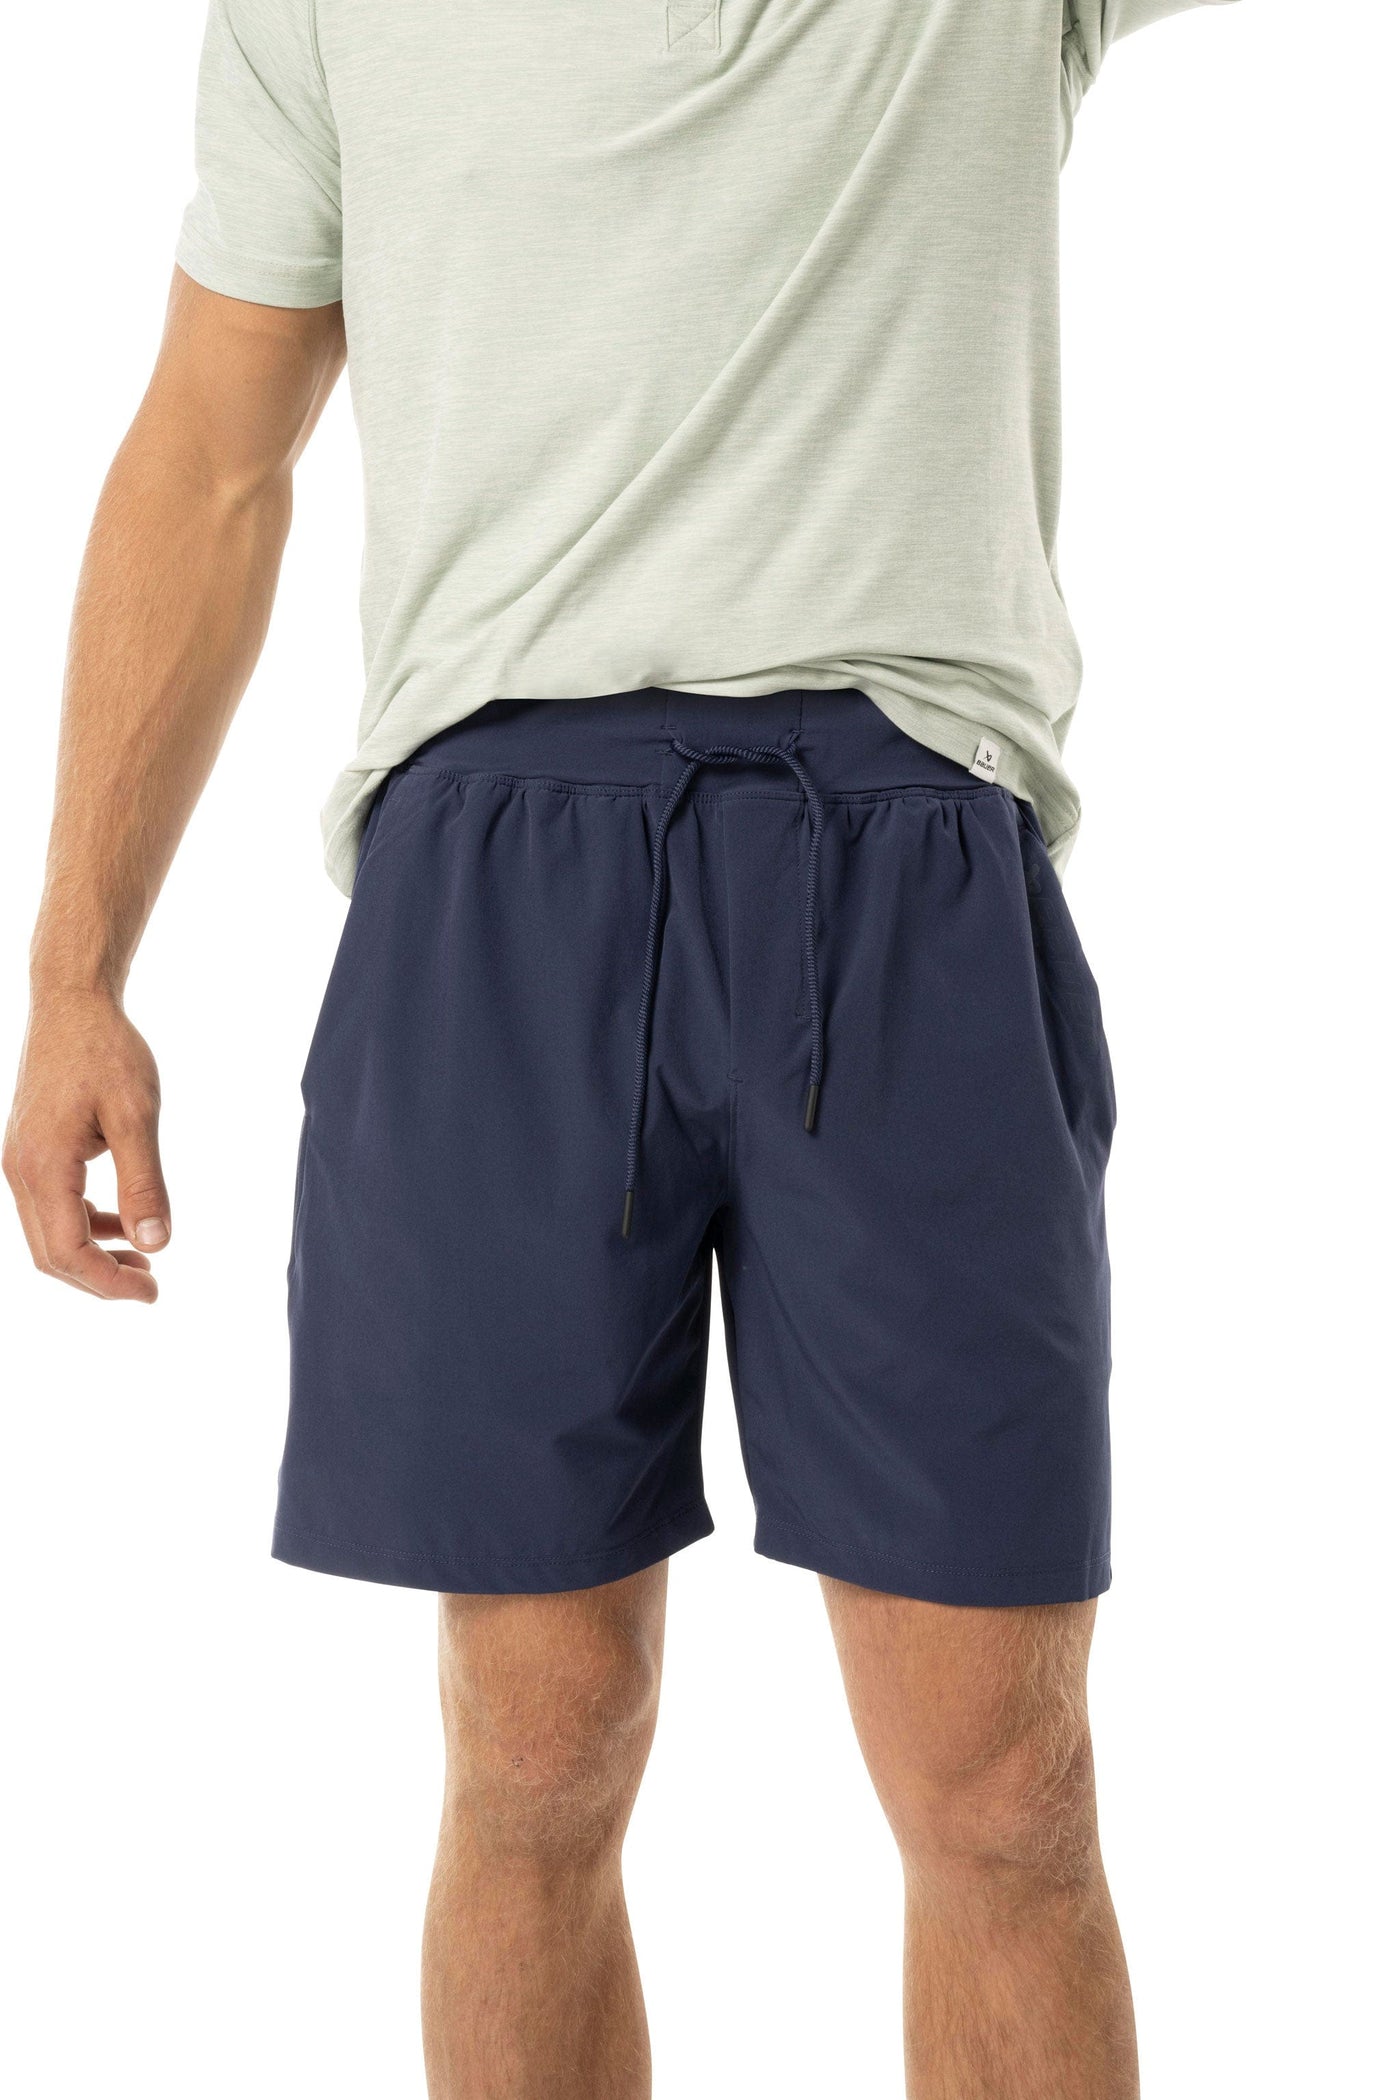 Bauer FLC Training Mens Shorts - Navy - The Hockey Shop Source For Sports